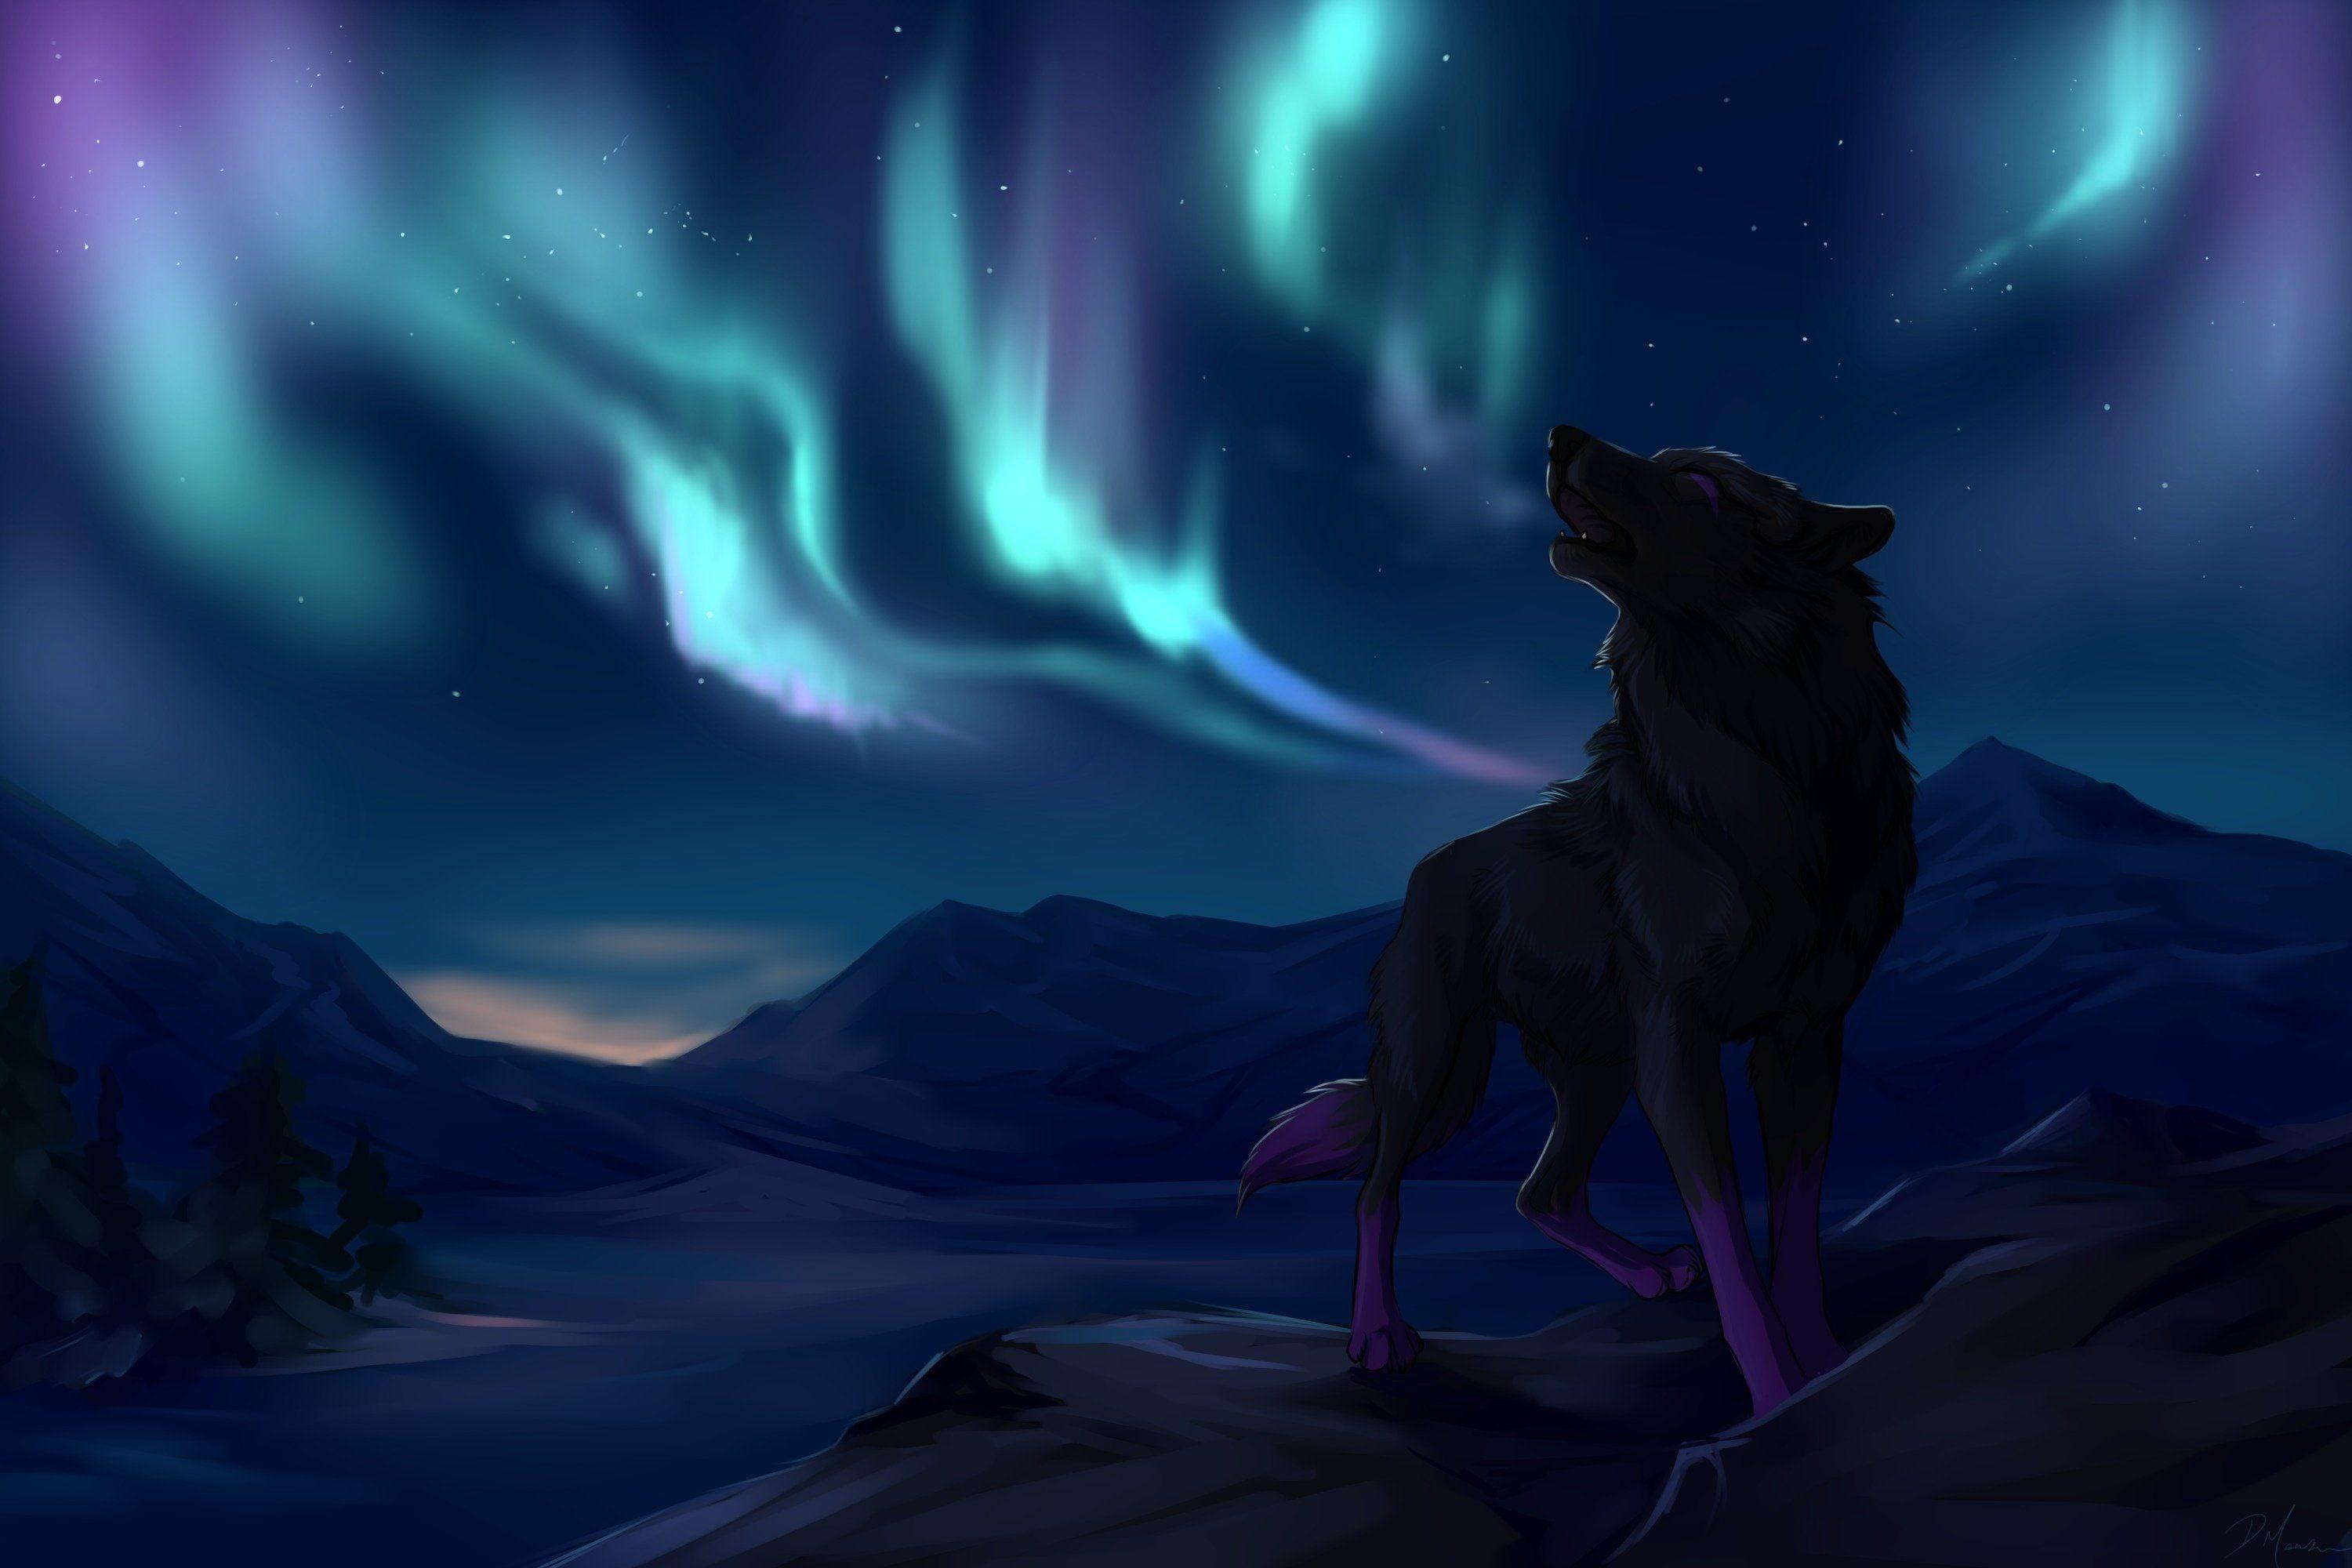 66 Anime Wolf Wallpaper Images, Stock Photos & Vectors | Shutterstock